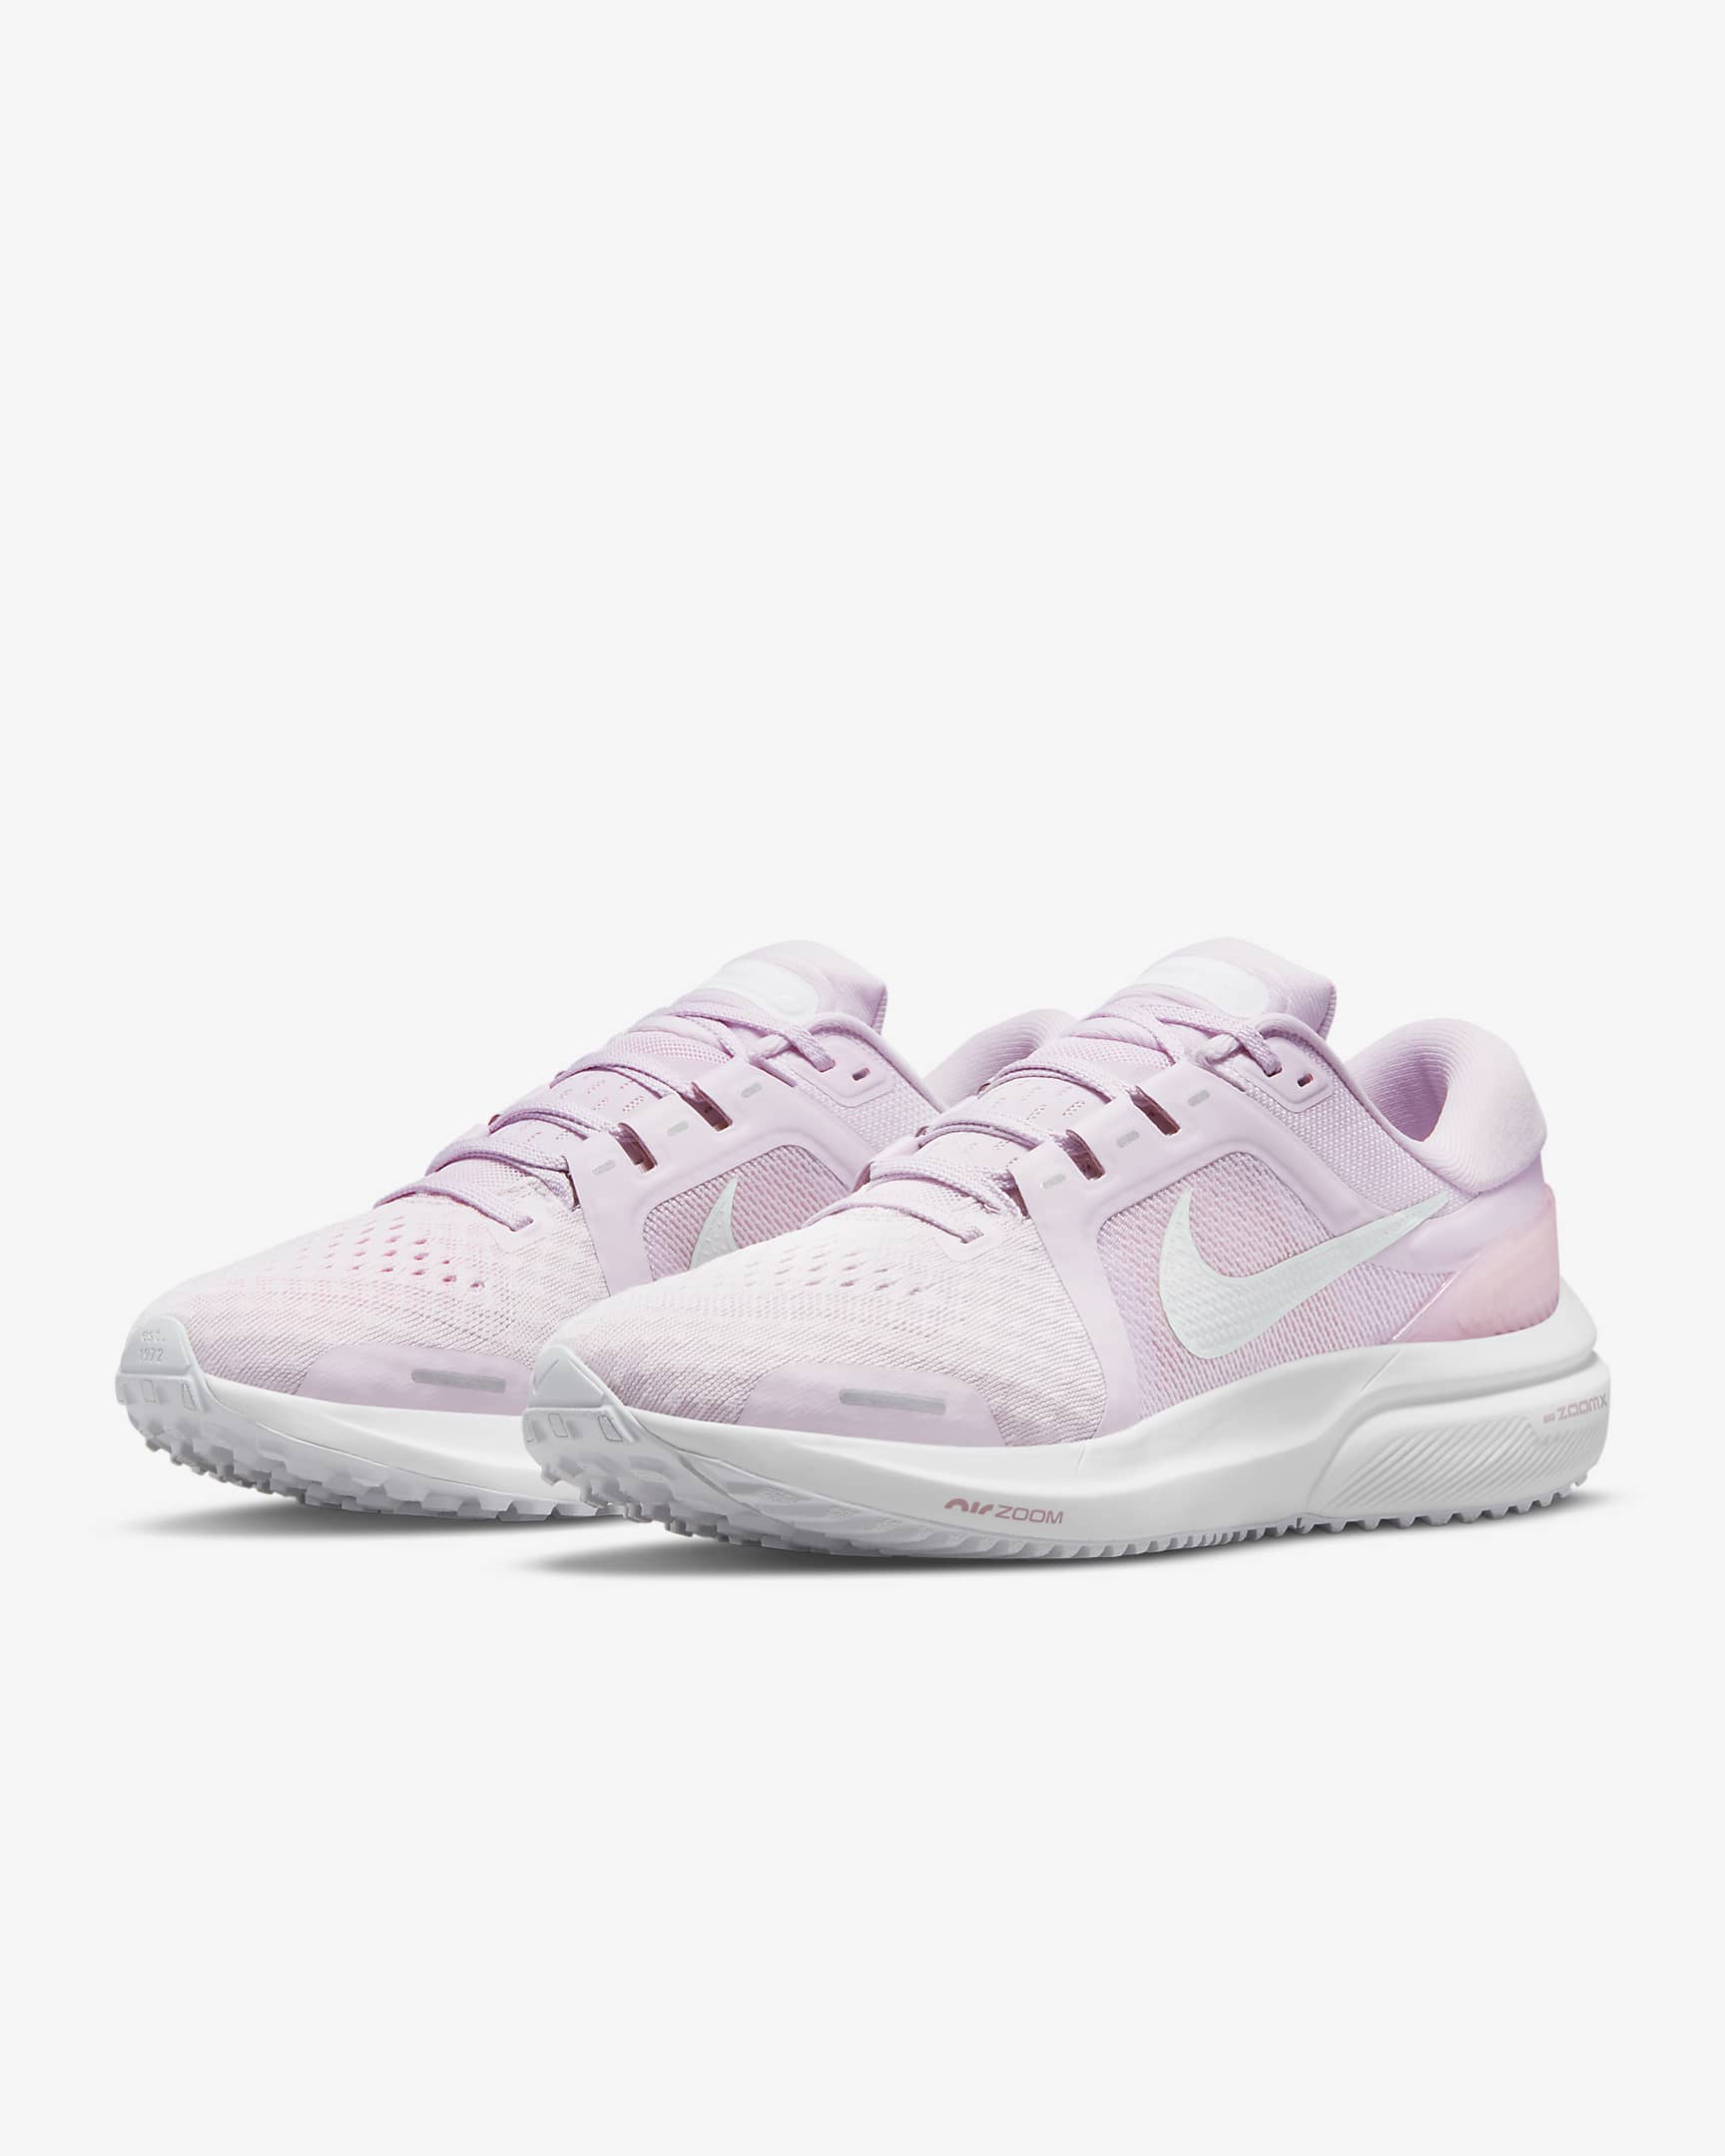 Nike Vomero 16 Women's Road Running Shoes - Regal Pink/Pink Glaze/White/Multi-Colour